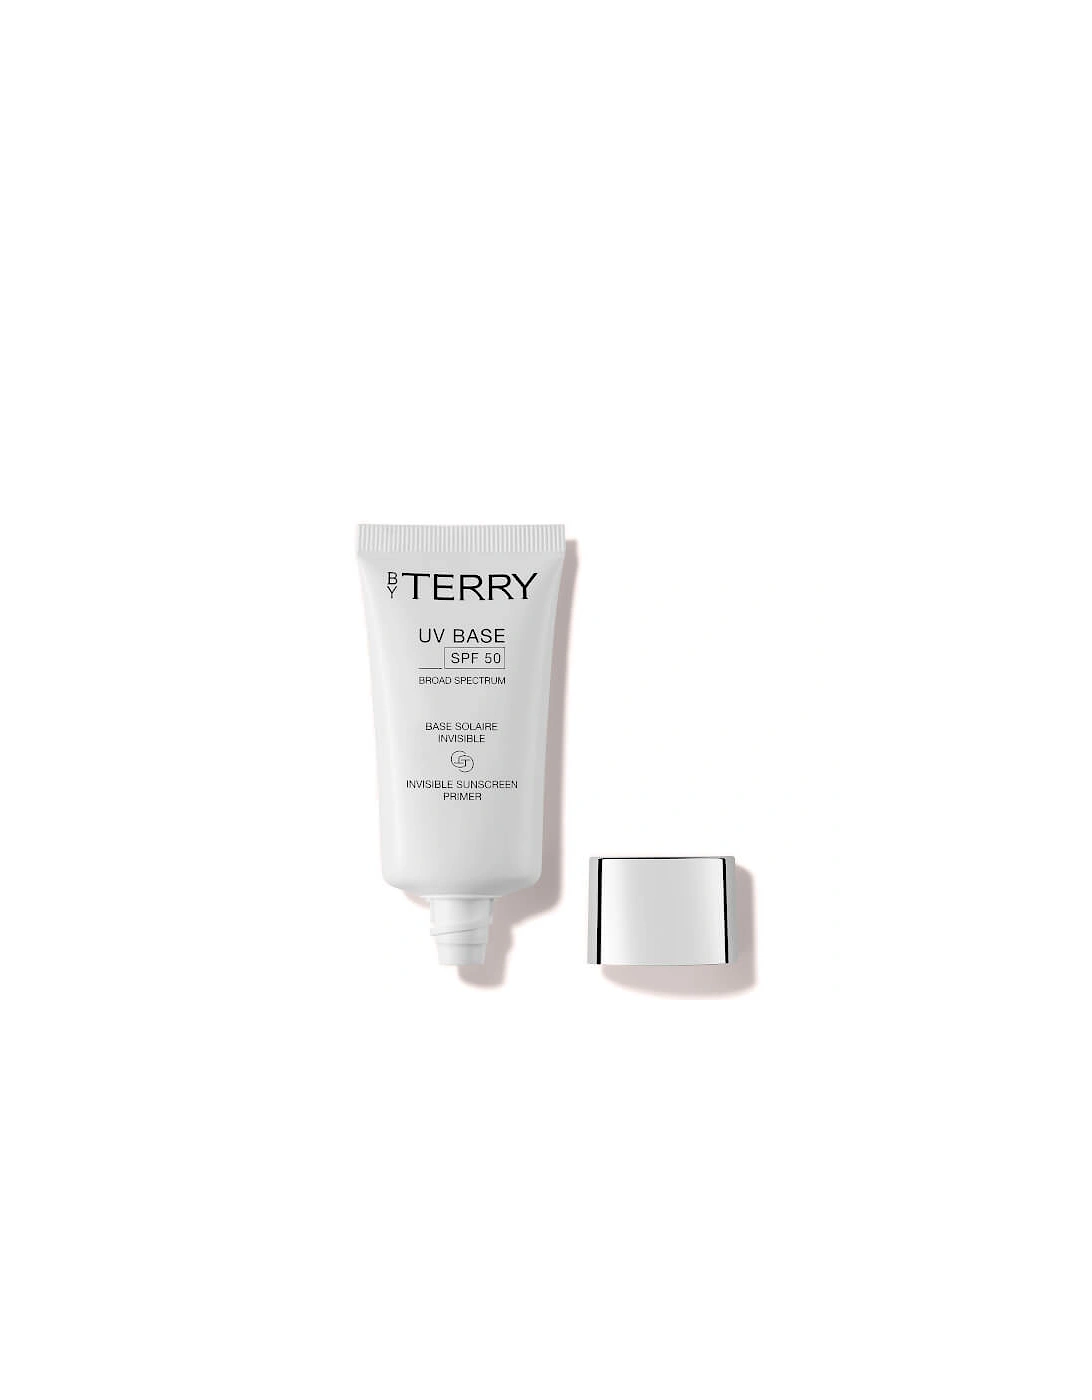 By Terry UV-Base Primer SPF 50 - By Terry, 2 of 1